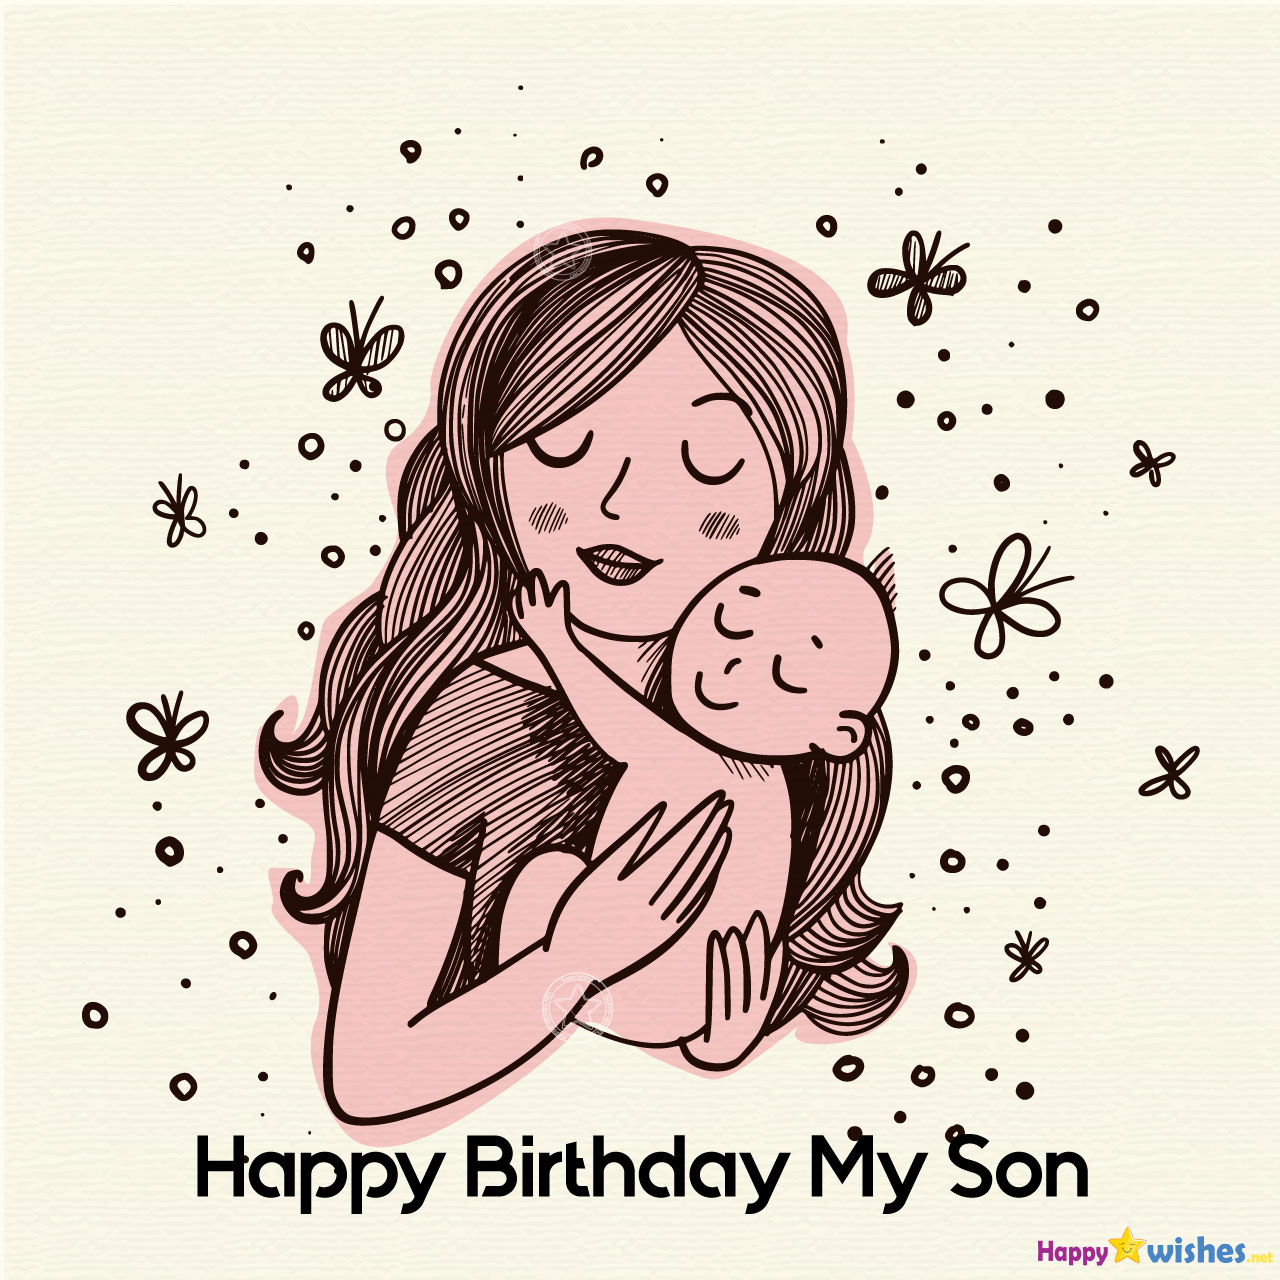 20+ Birthday Wishes For Son From Mother